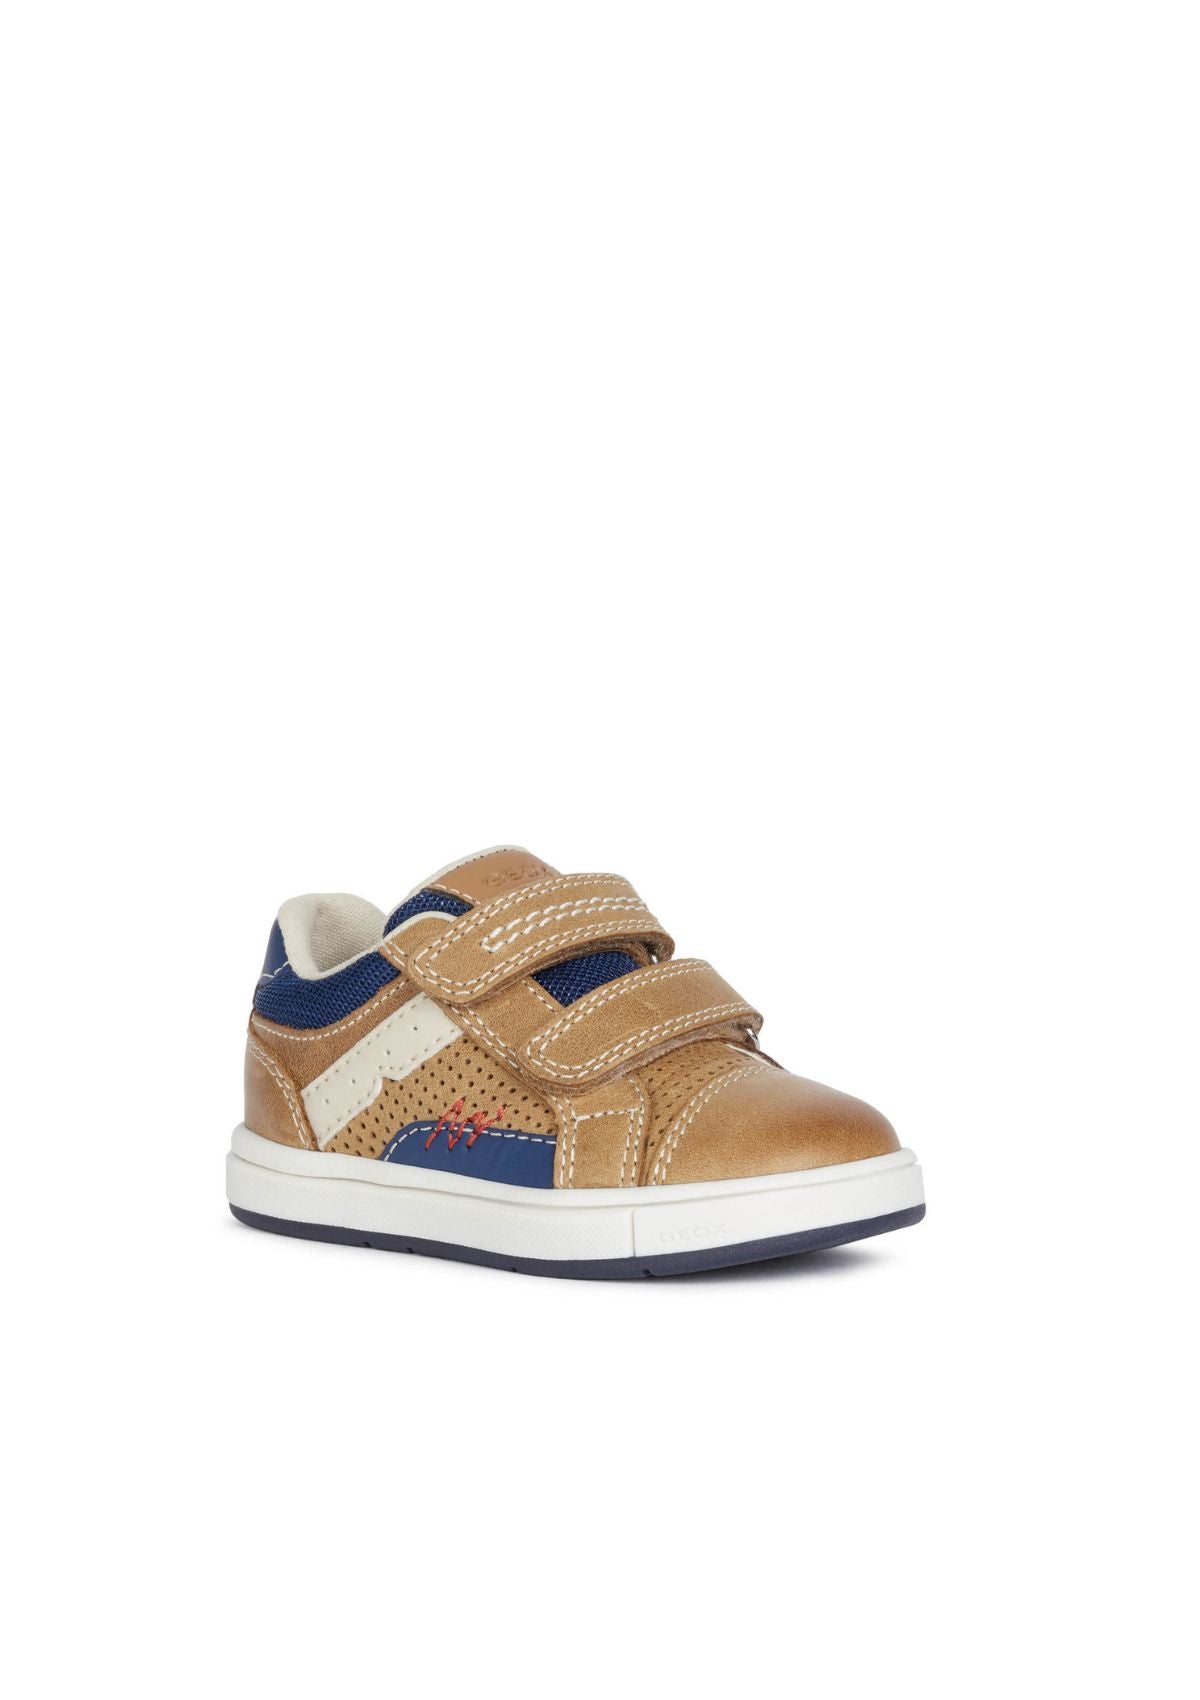 Geox Baby Boys Trainers TROTTOLA Caramel Navy side front